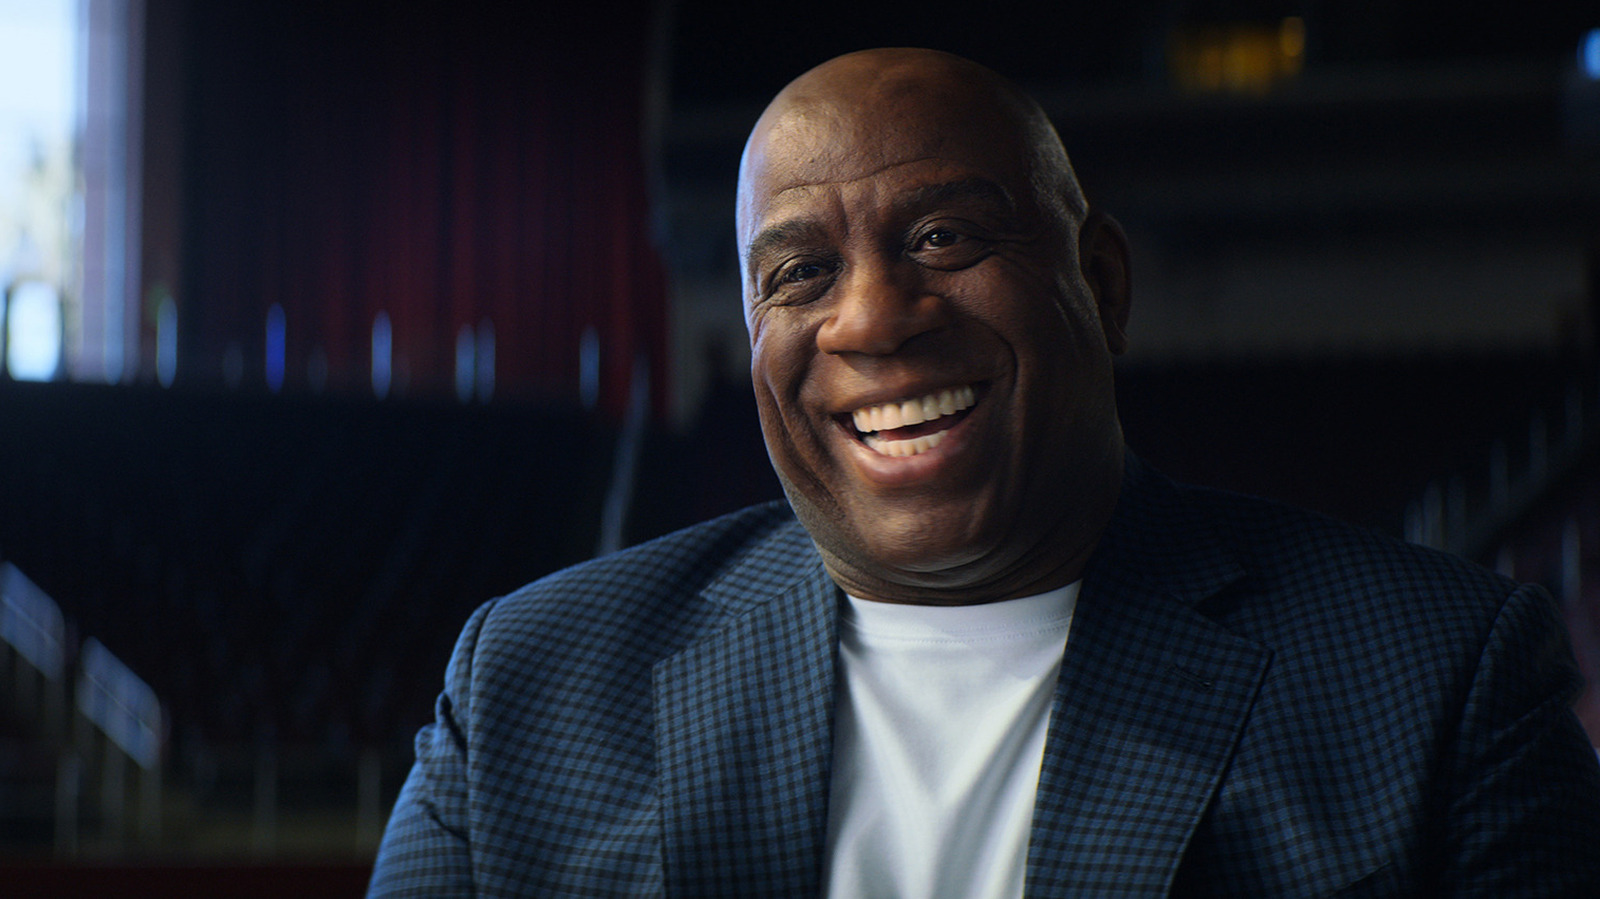 Mad Mike – “Give Magic Johnson all you've got”, Opinion